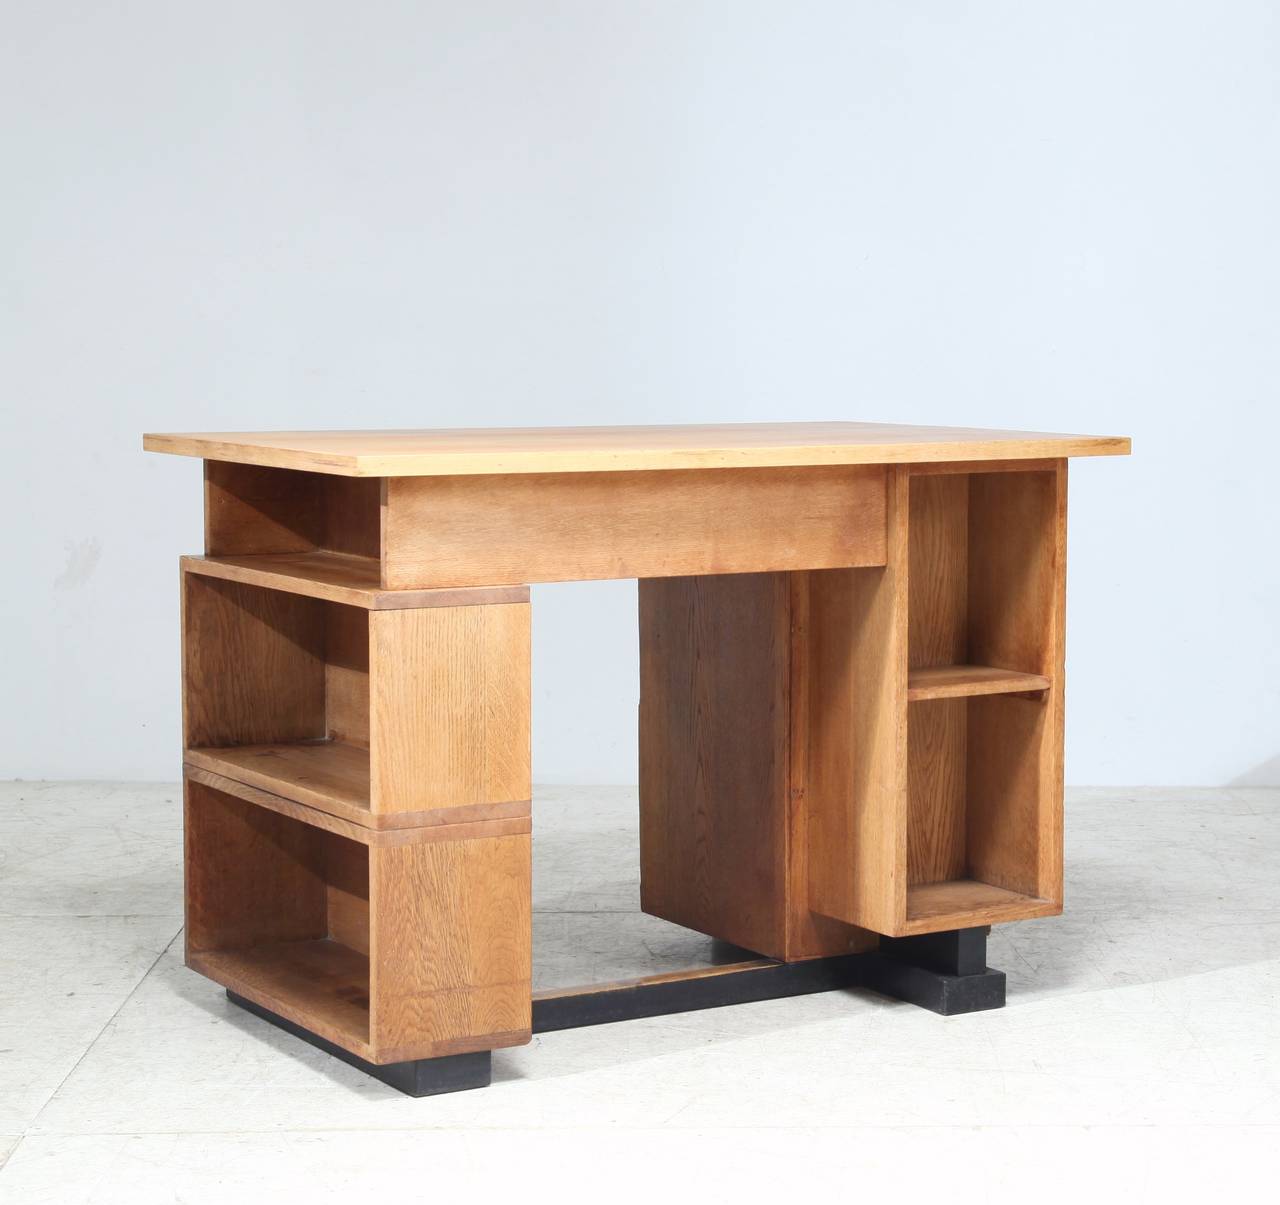 Dutch Rare 1920s Desk by Muntendam for LOV Oosterbeek For Sale